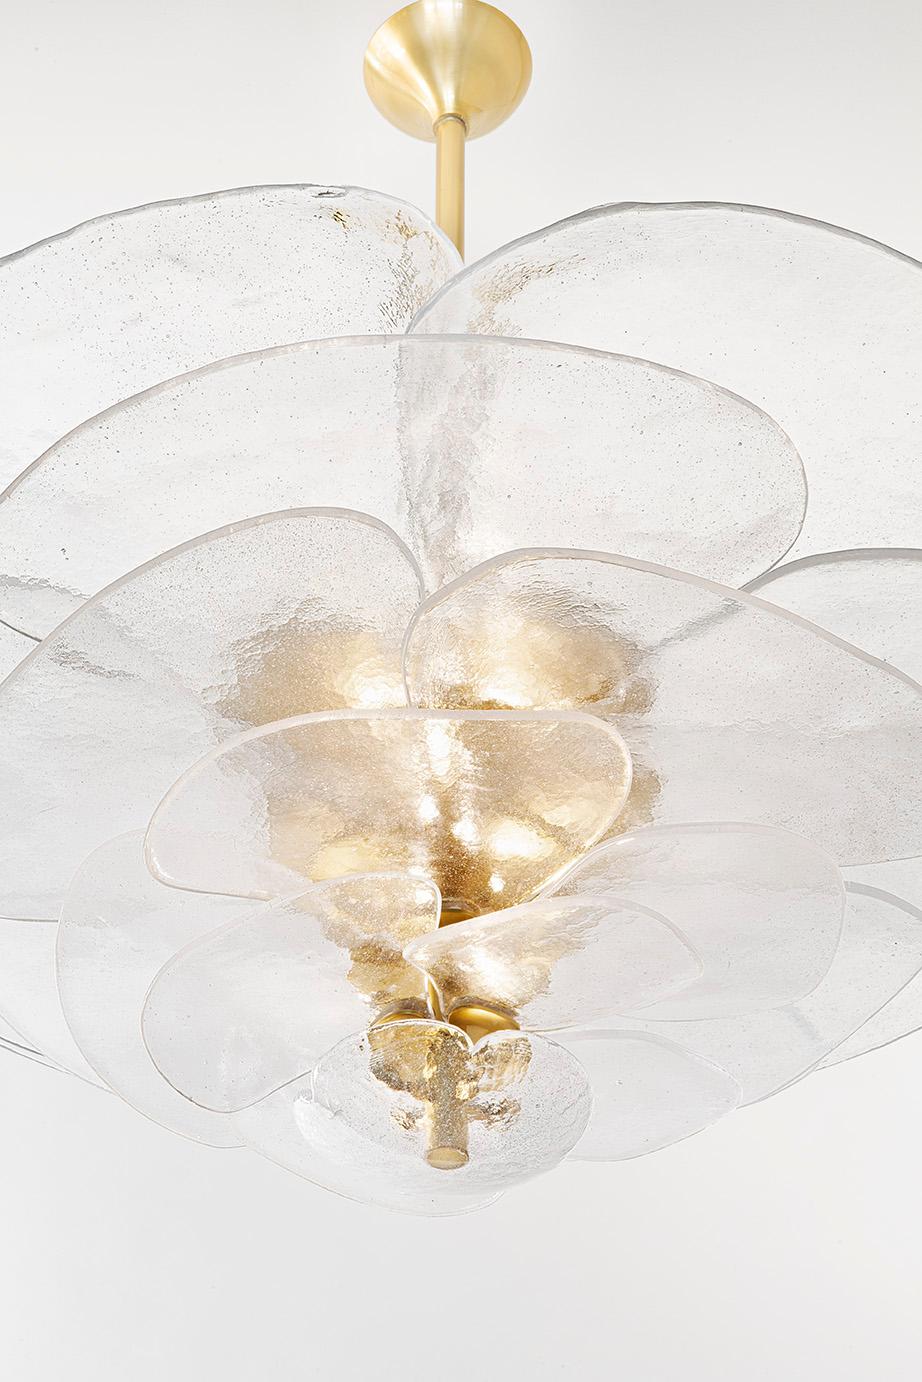 Textured glass chandelier composed of individuals bubbled petals mounted on a brass structure, in the shape of a lily pad flower that diffuses light. 
The chandelier is composed of 24 spotlights.
All is crafted in northen Italy near Venise.